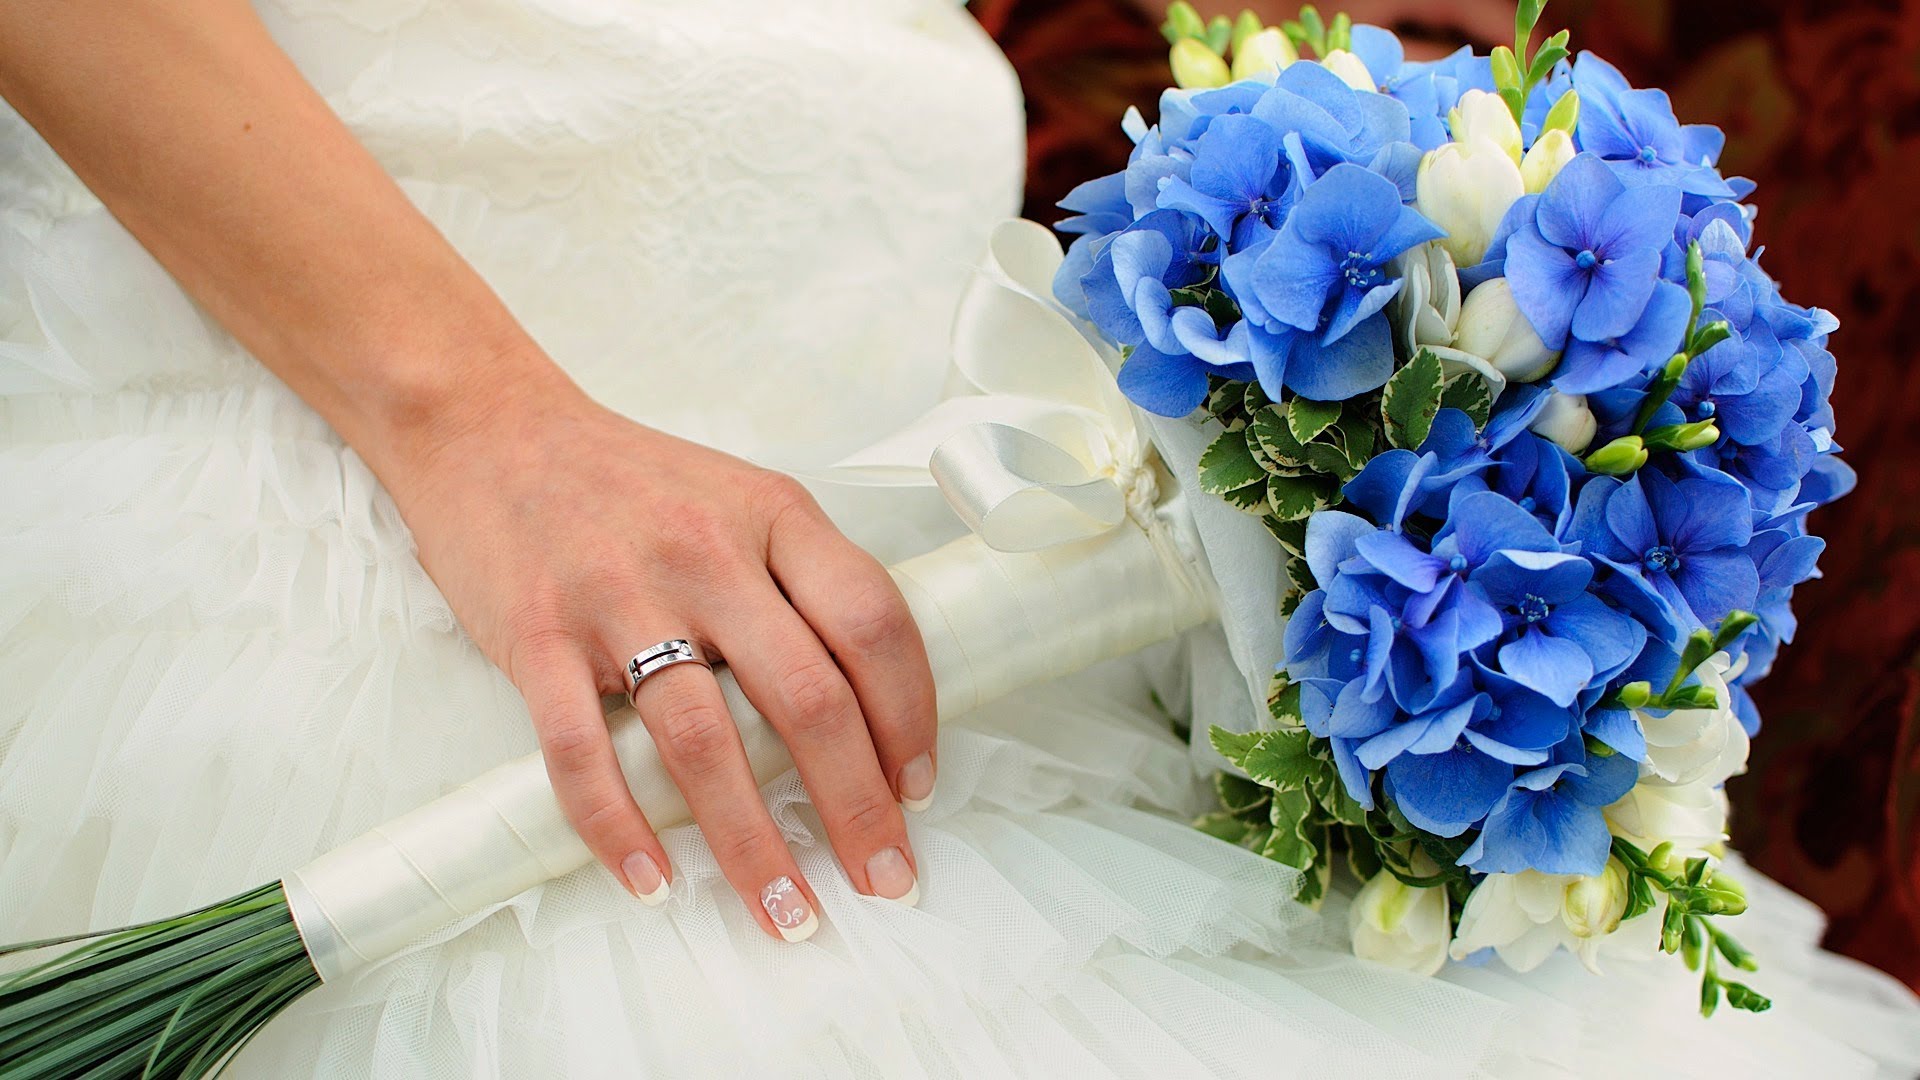 6 Tips about Blue Flowers | Wedding Flowers - YouTube